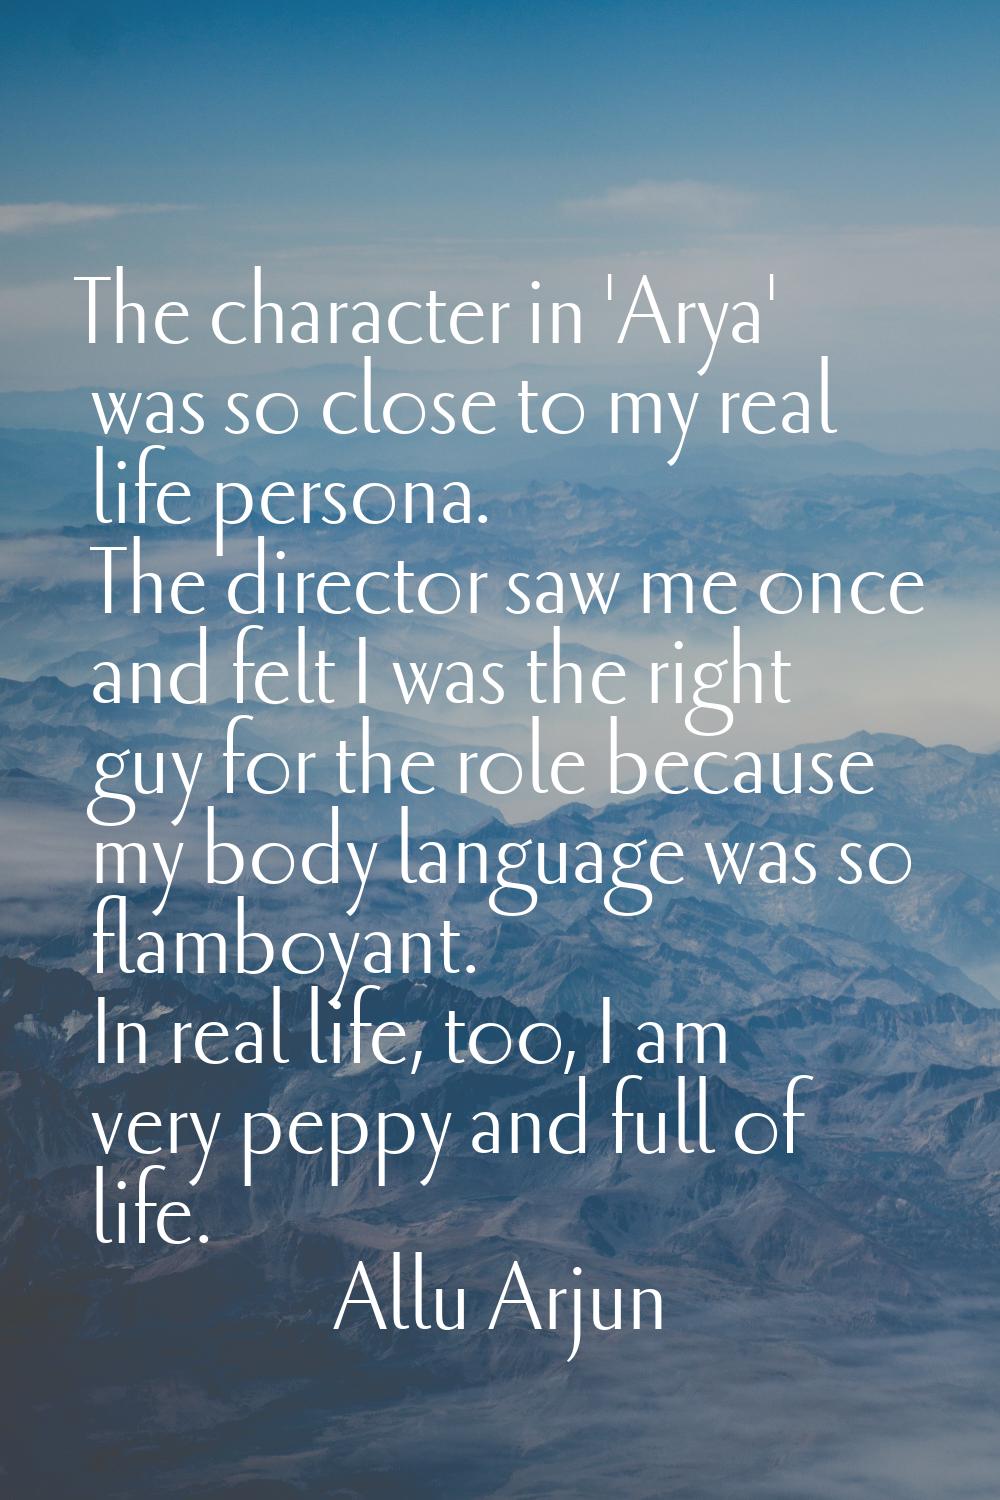 The character in 'Arya' was so close to my real life persona. The director saw me once and felt I w